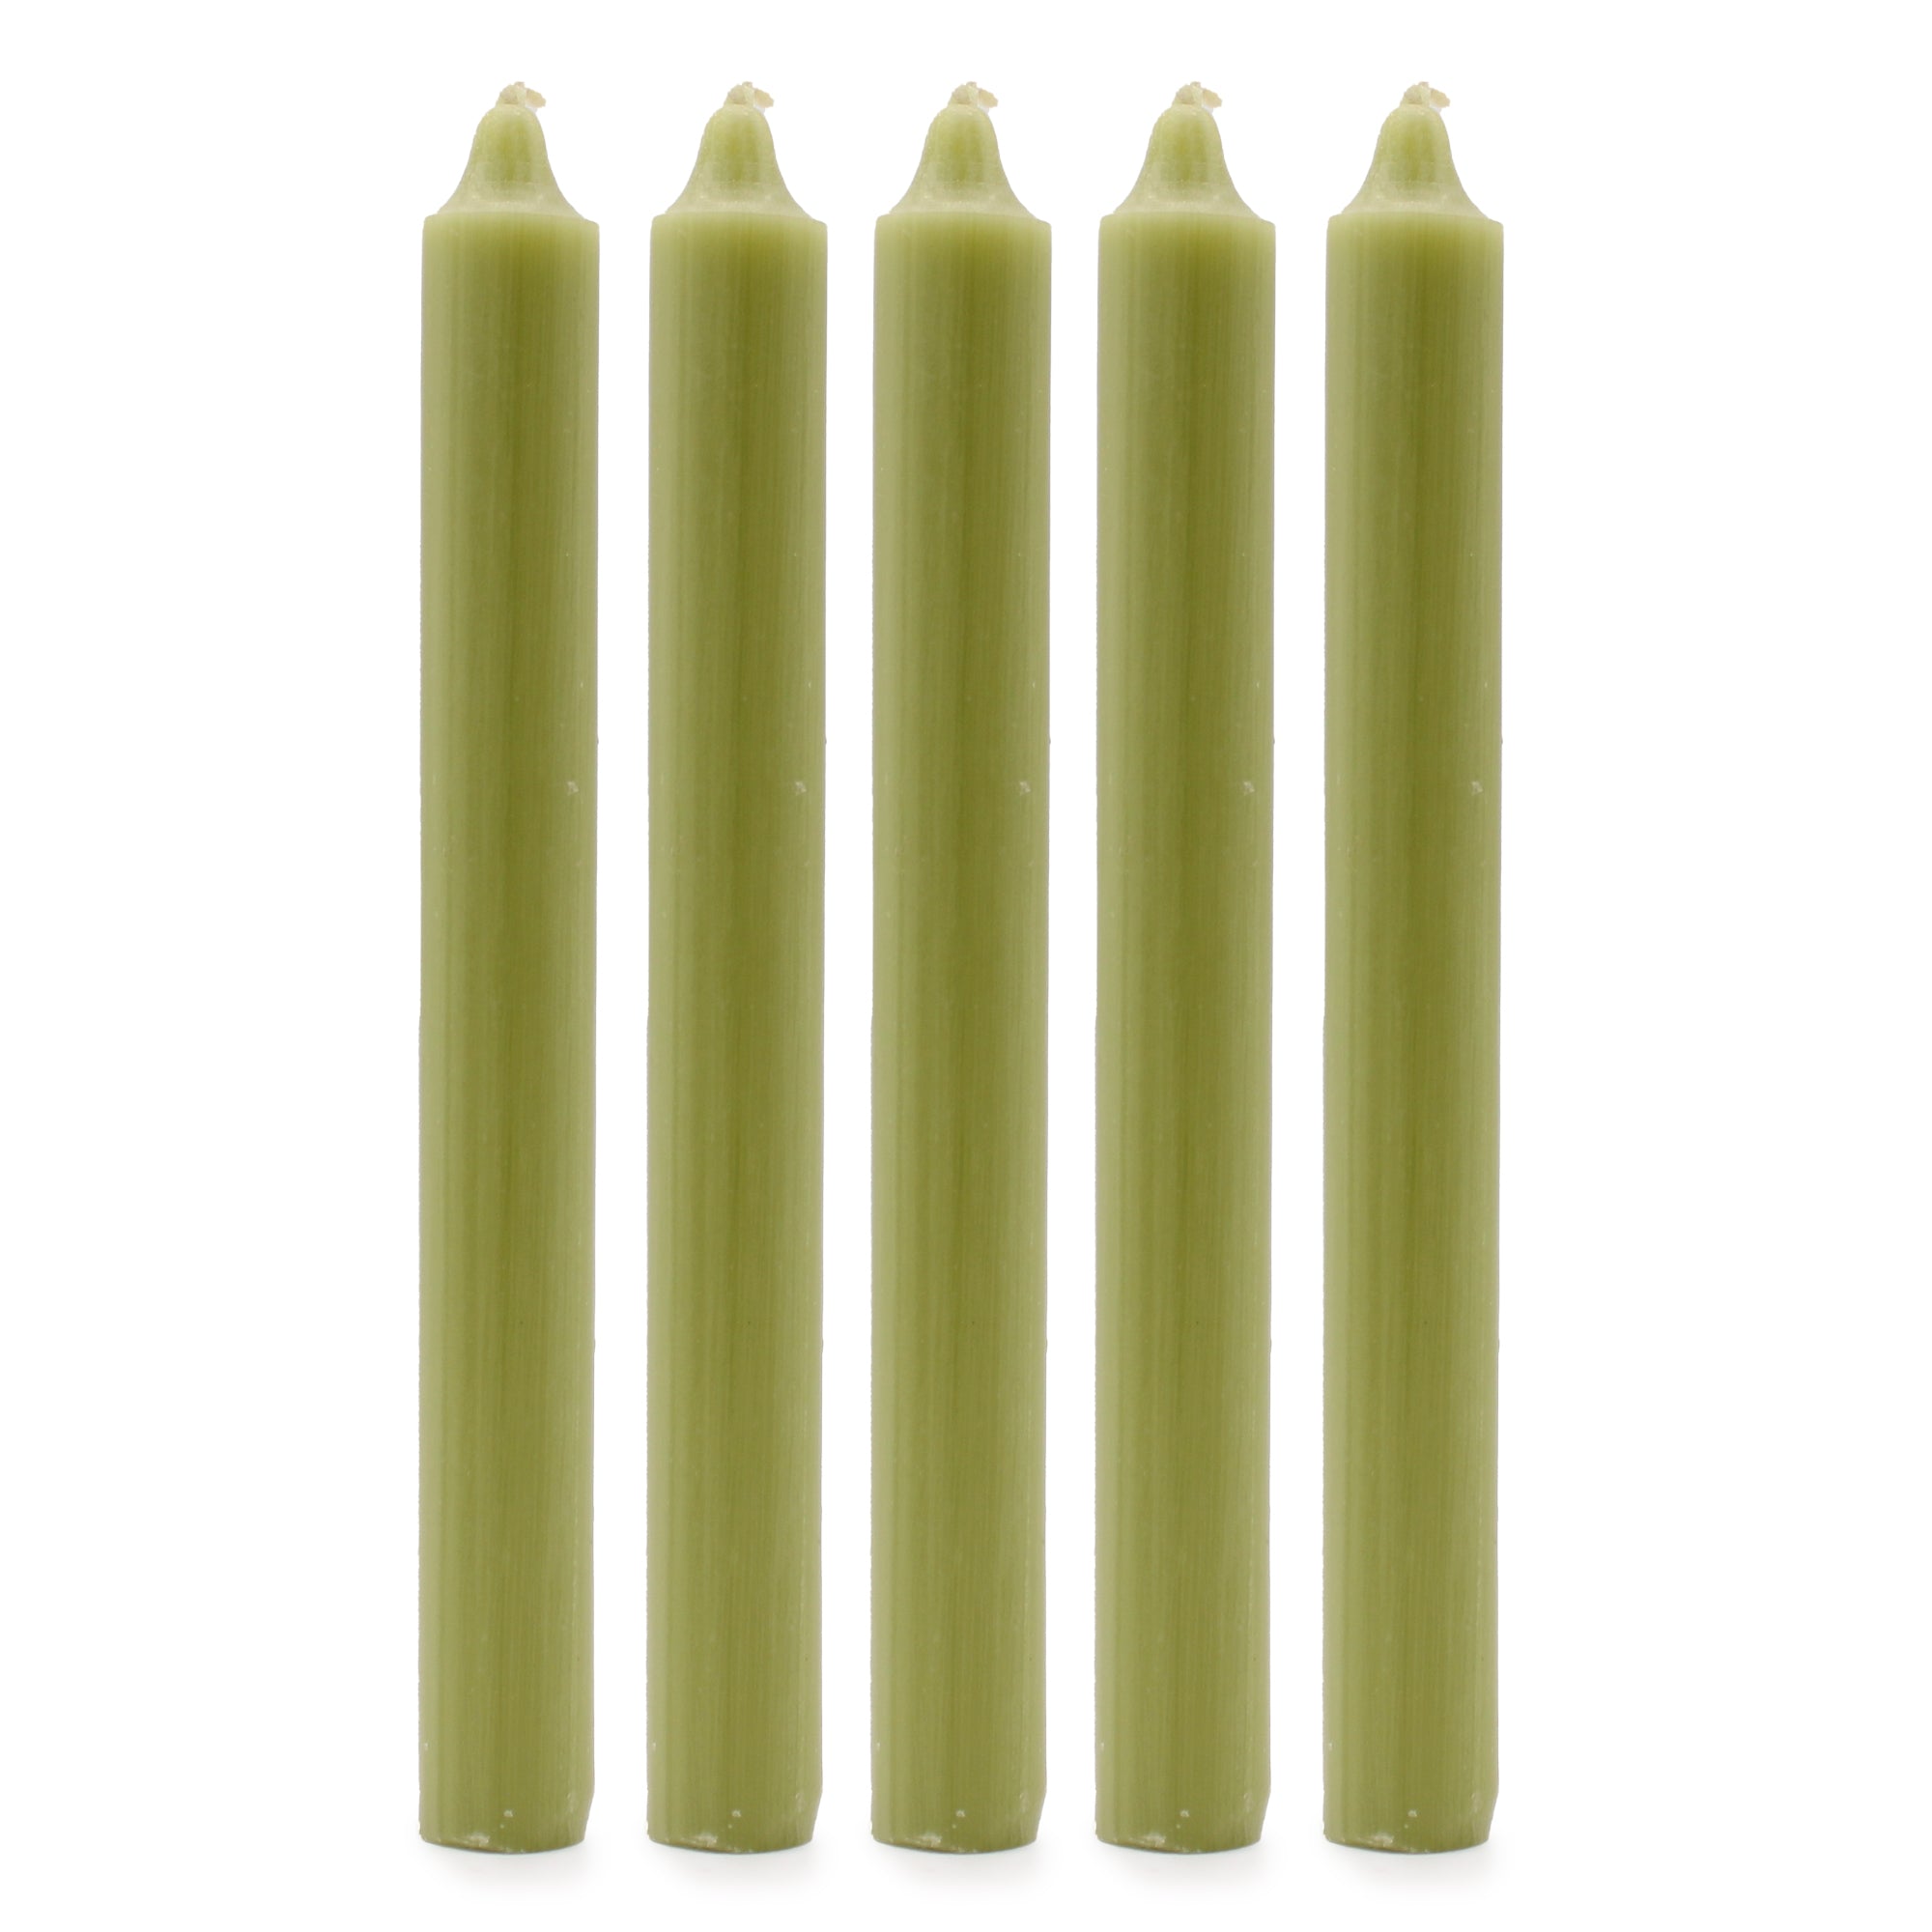 View Solid Colour Dinner Candles Rustic Olive Pack of 5 information